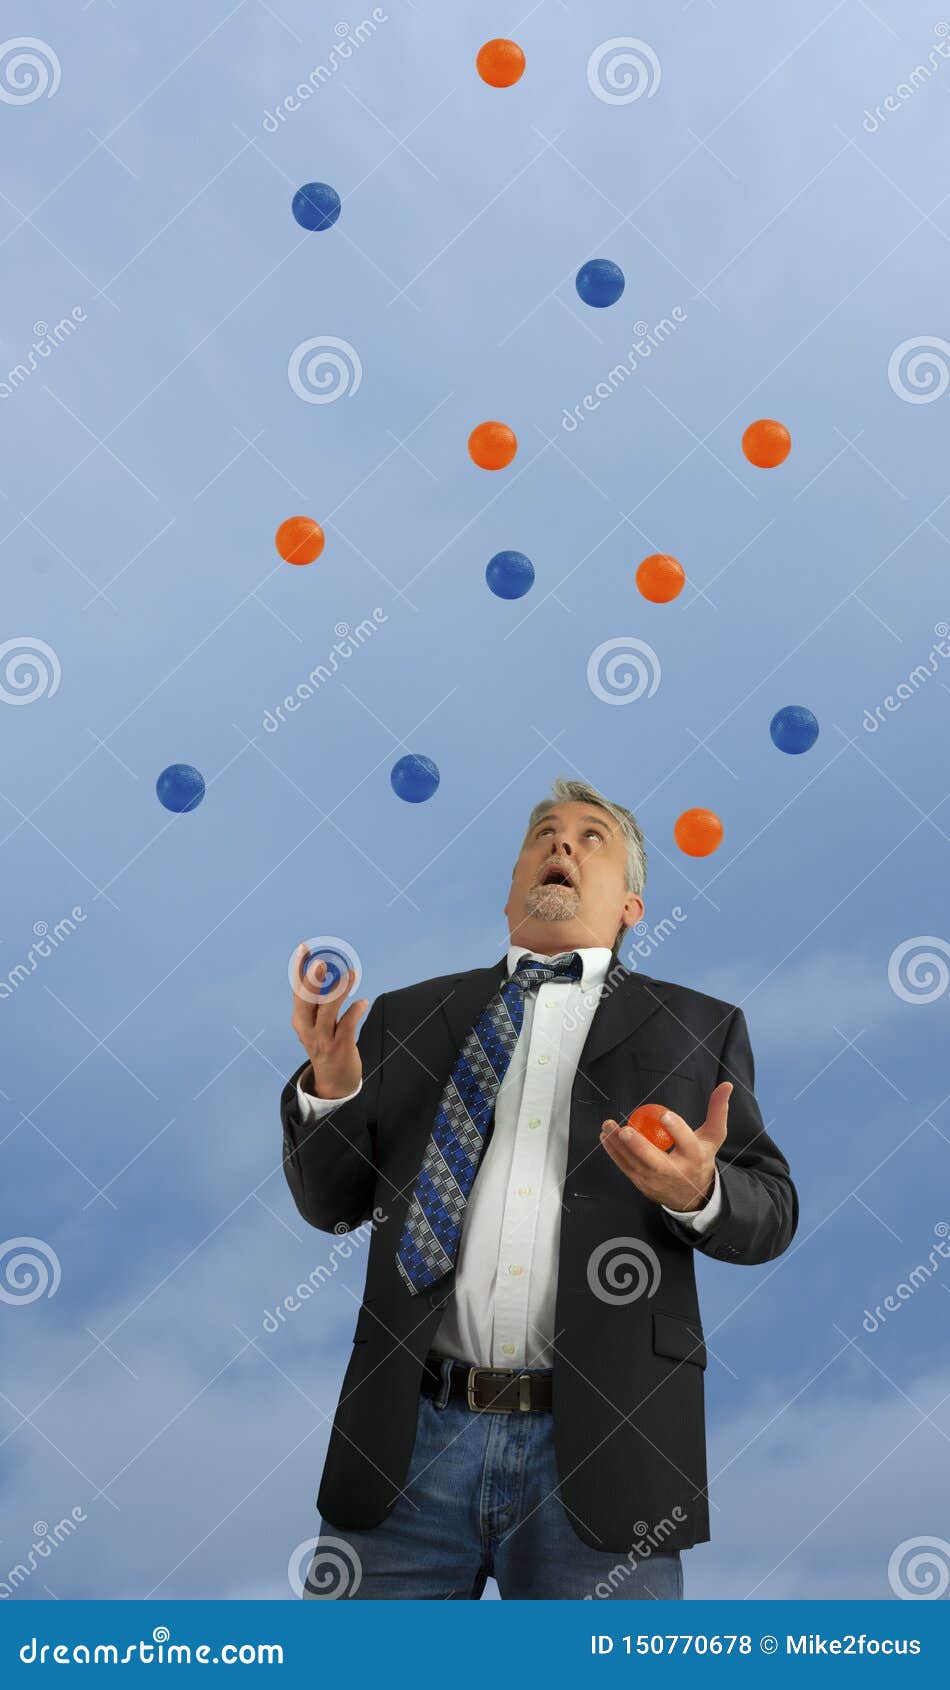 Man Juggling A Lot Of Balls In The Air Representing Being Out Of